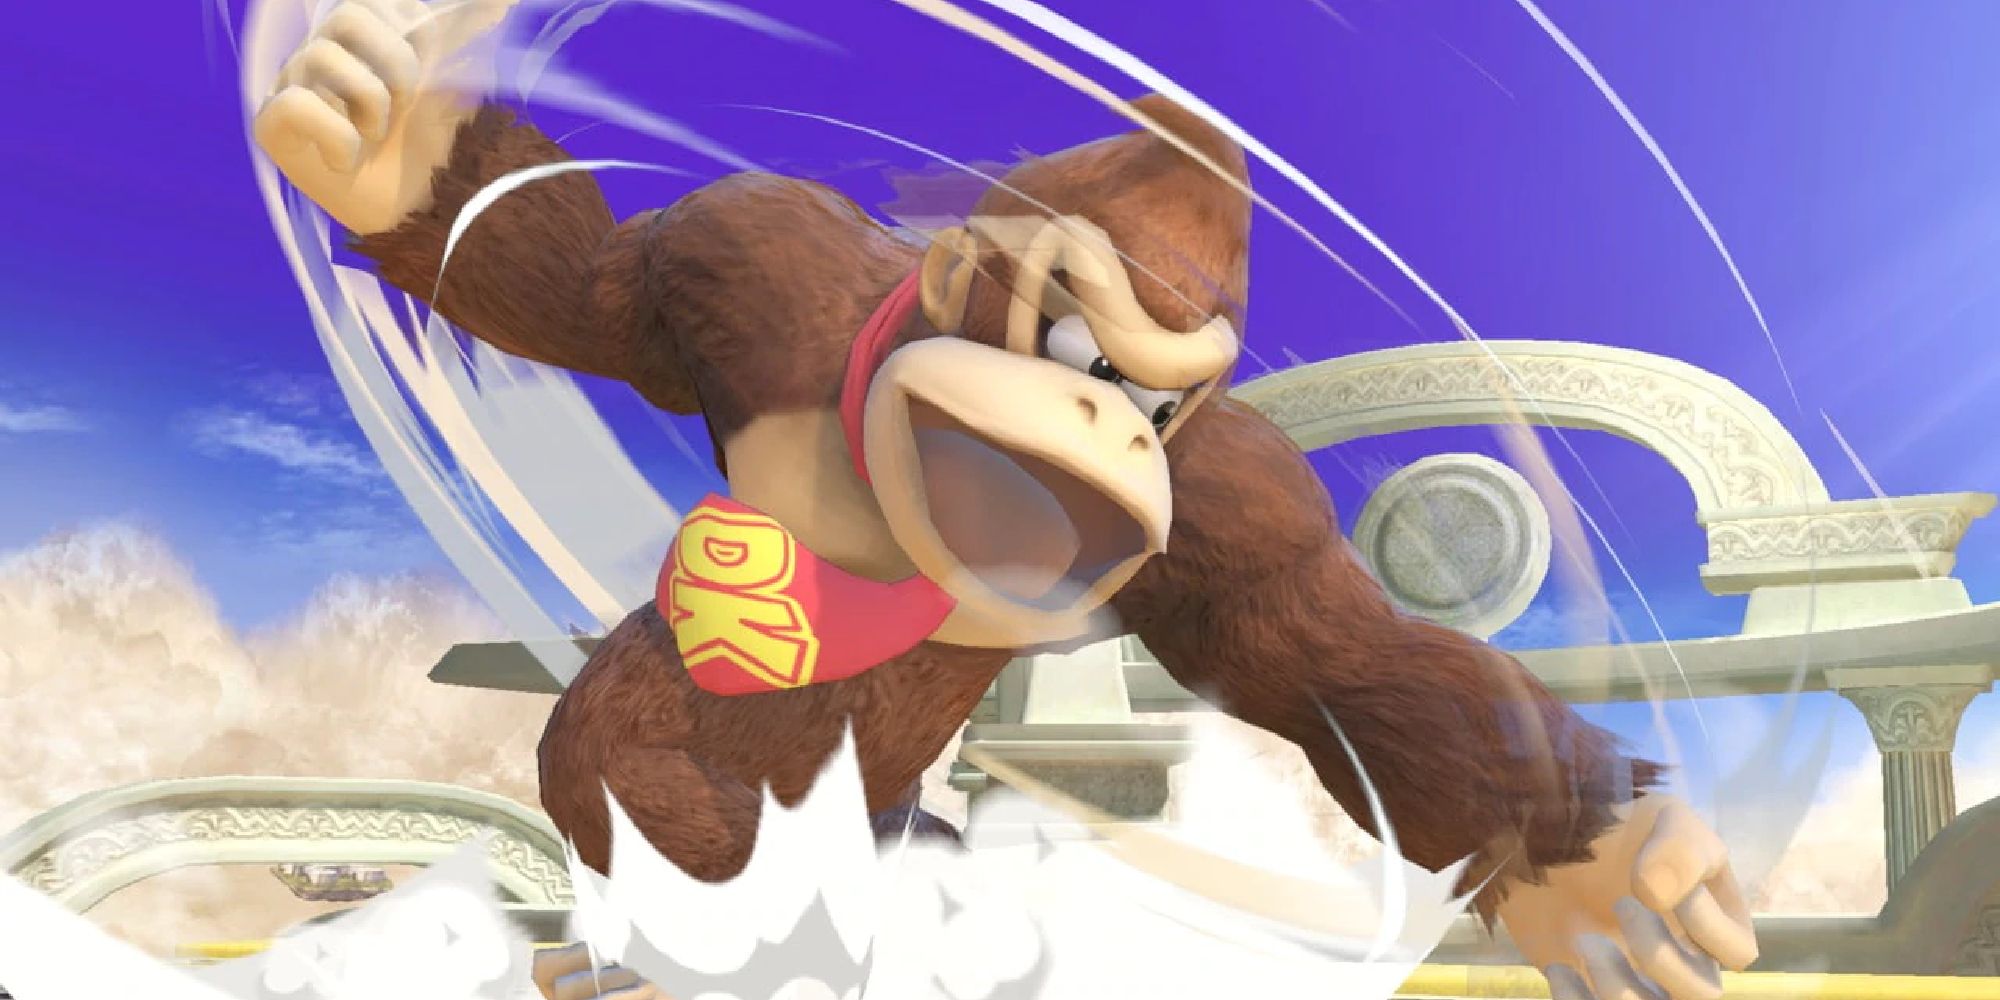 Donkey Kong swinging his arms on Skyworld in Super Smash Bros Ultimate